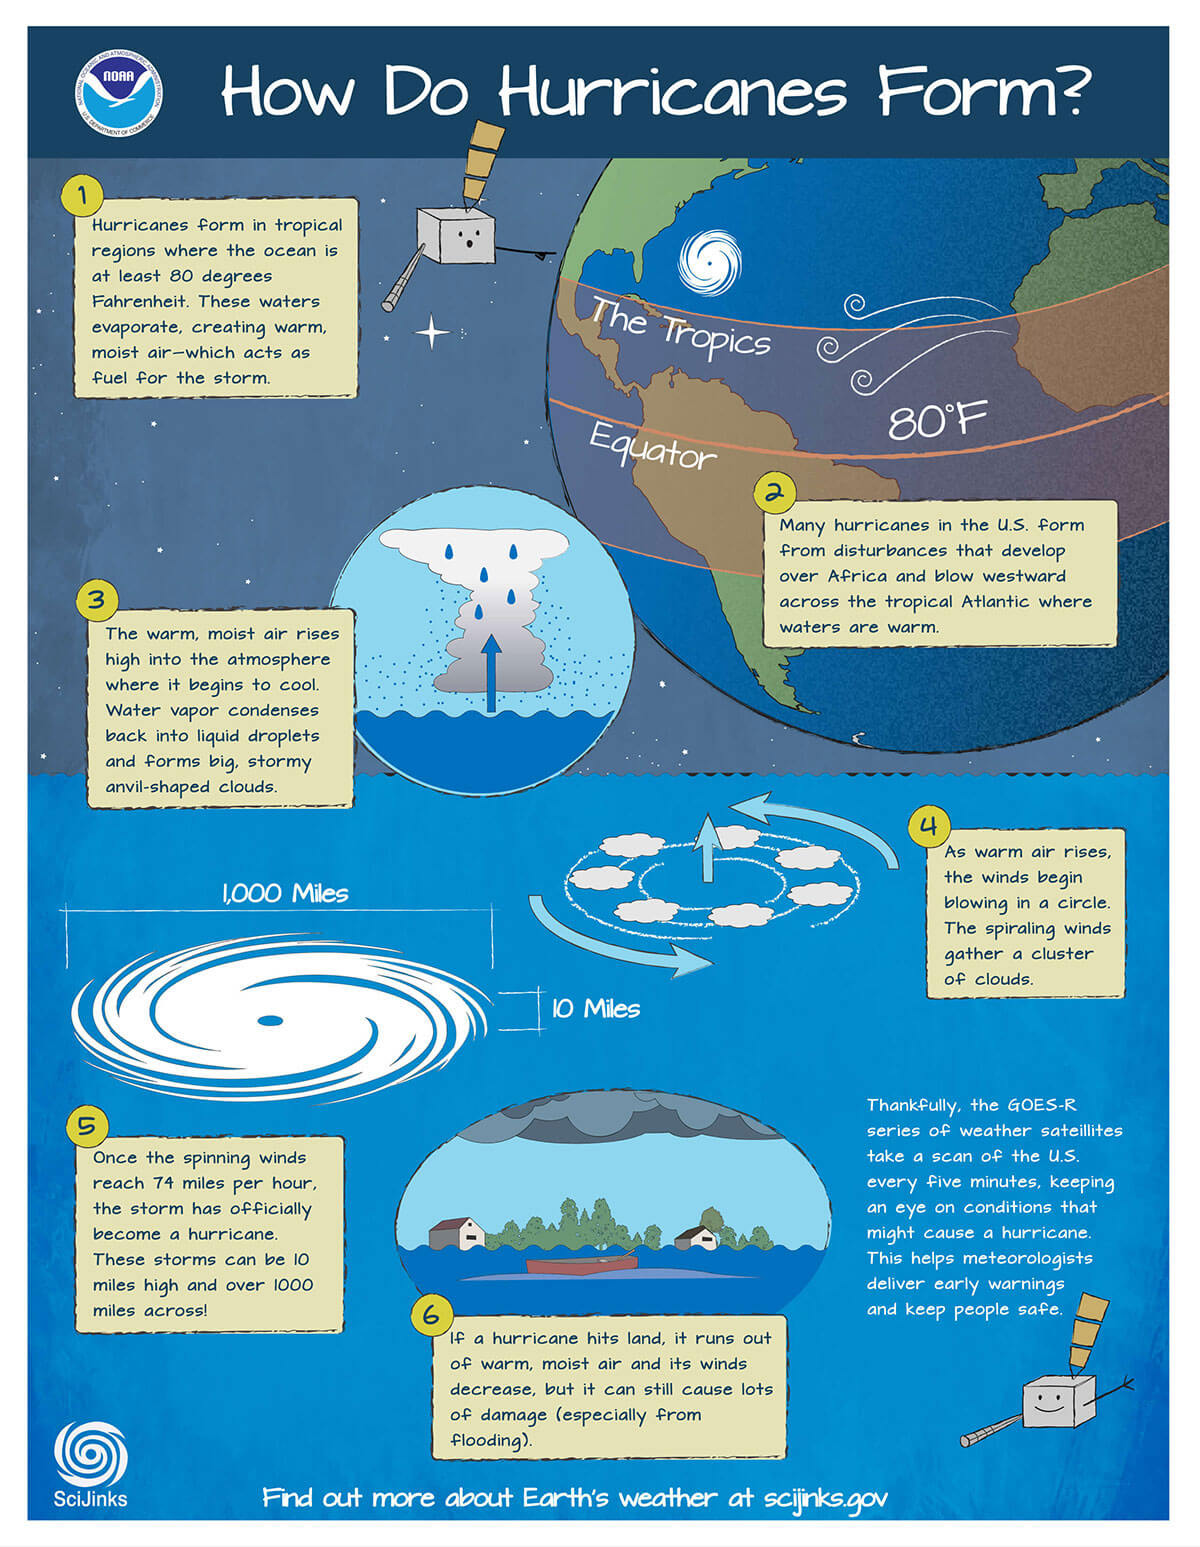 Thumbail of the How Do Hurricanes Form? poster.